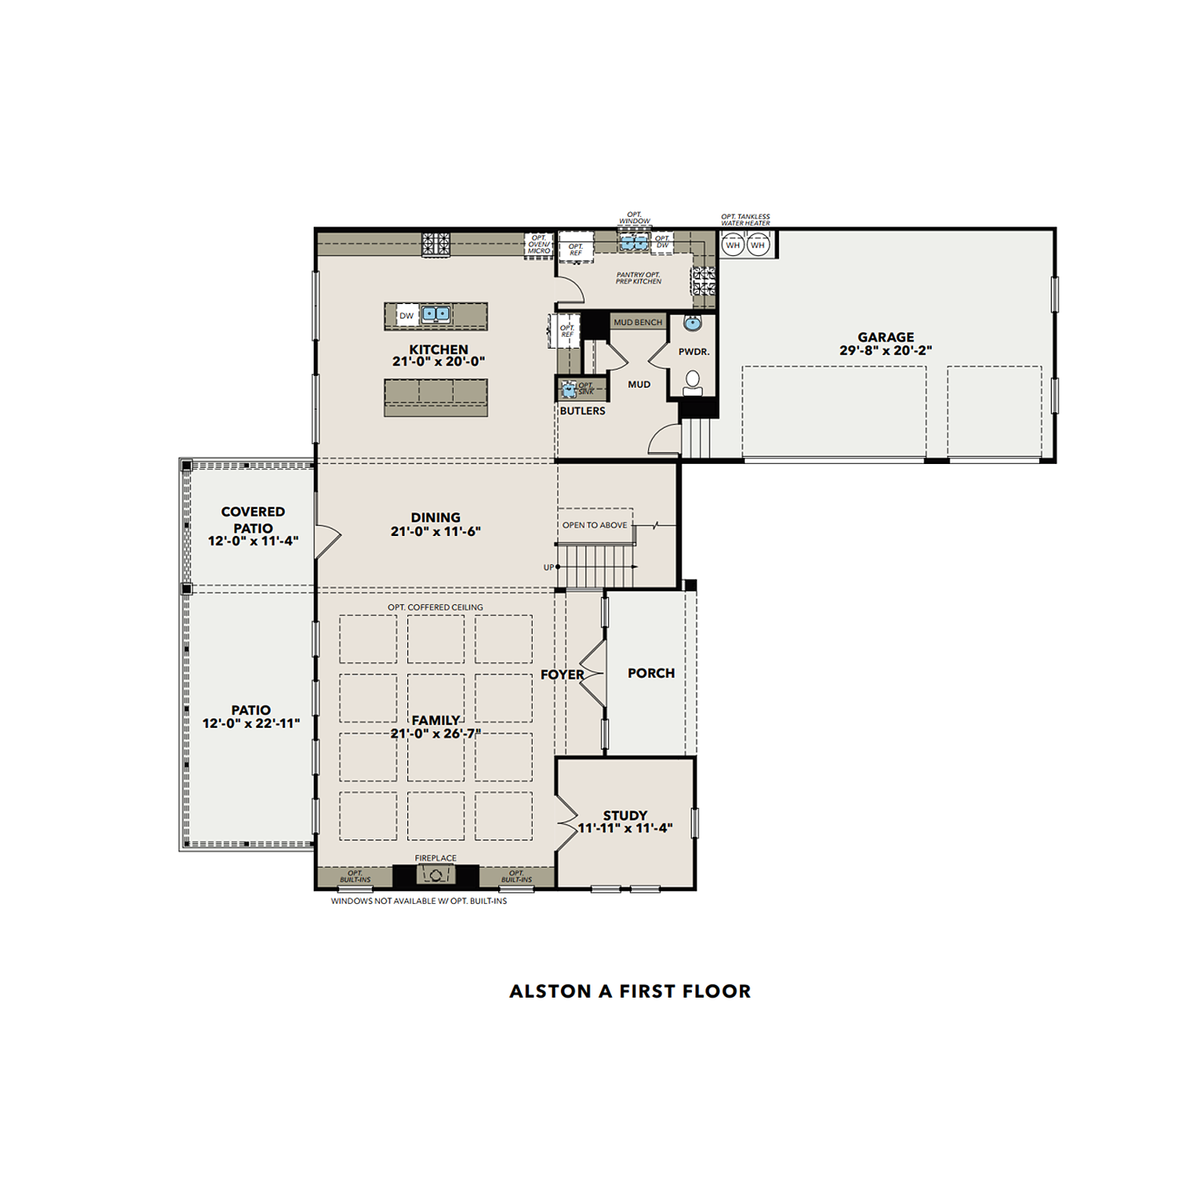 1 - The Alston A buildable floor plan layout in Davidson Homes' Tanglewood community.